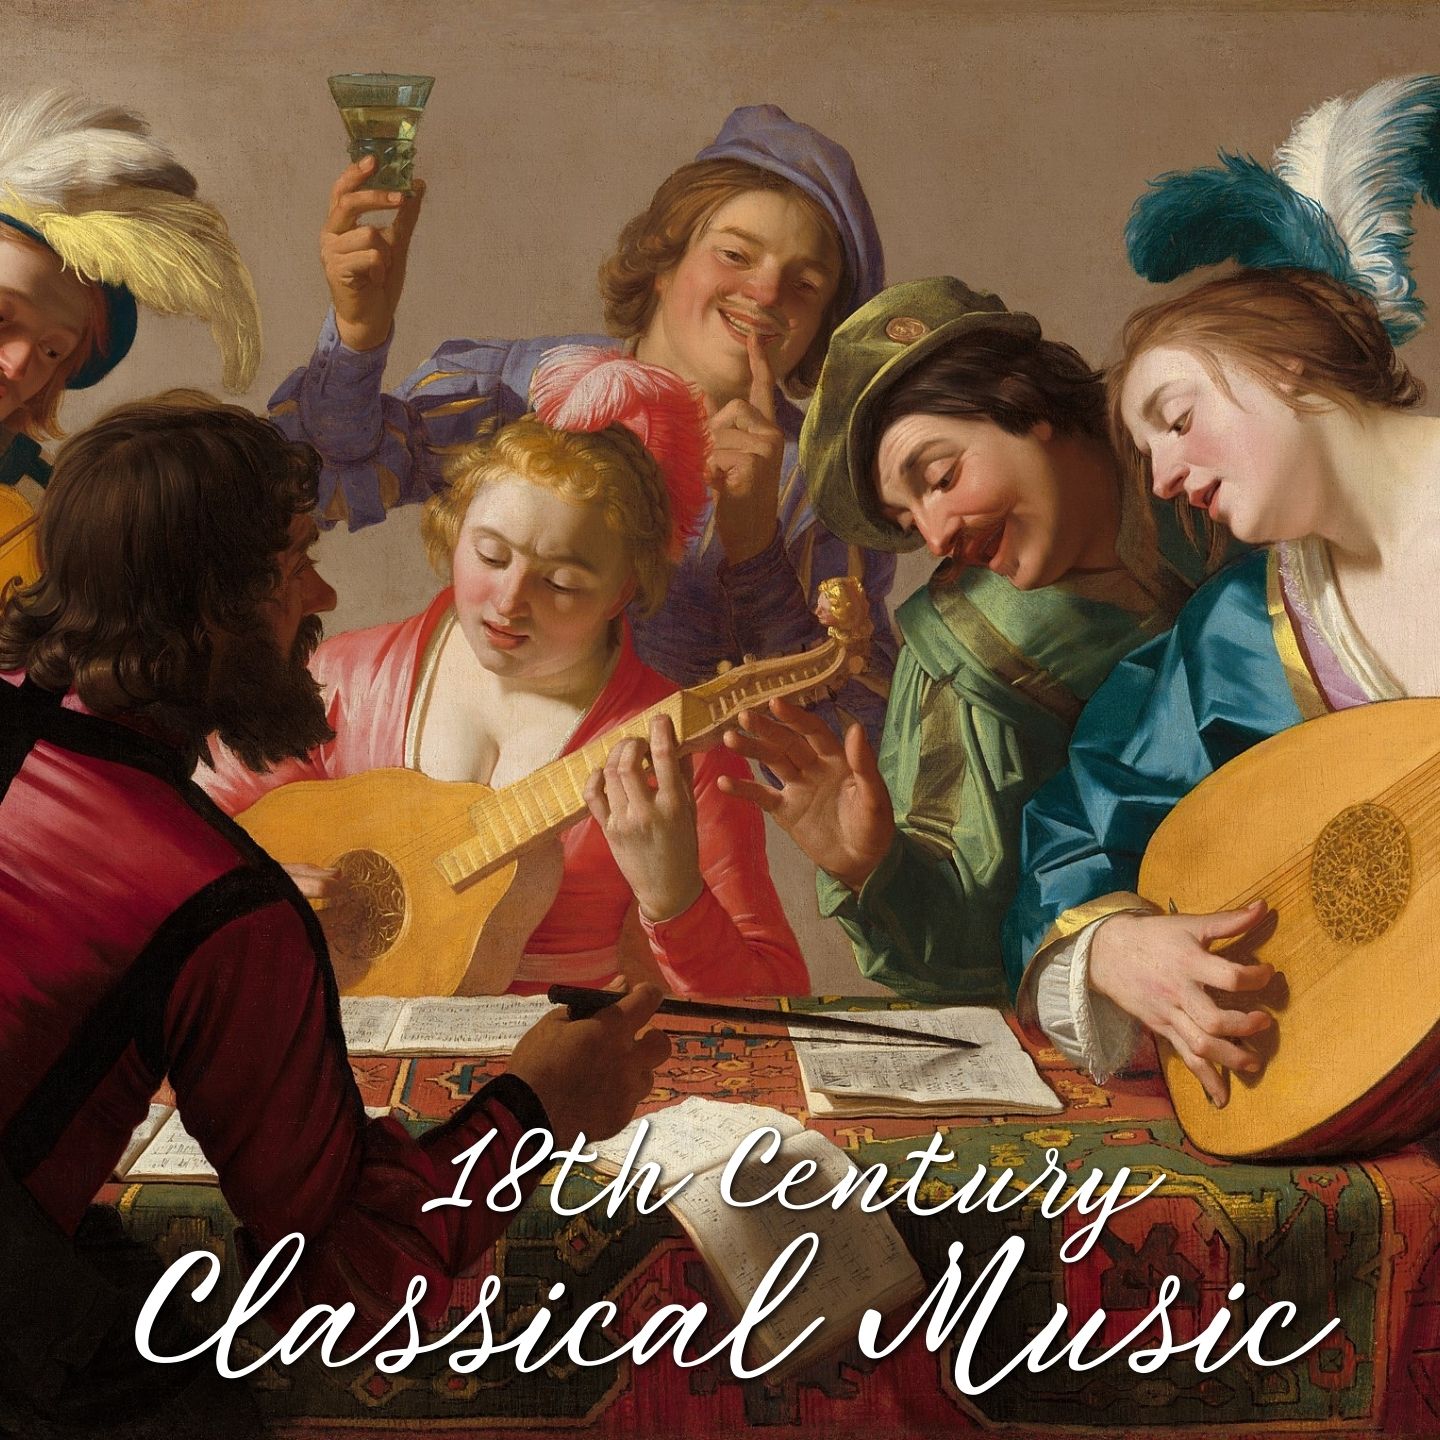 Classical Music from the 18th Century